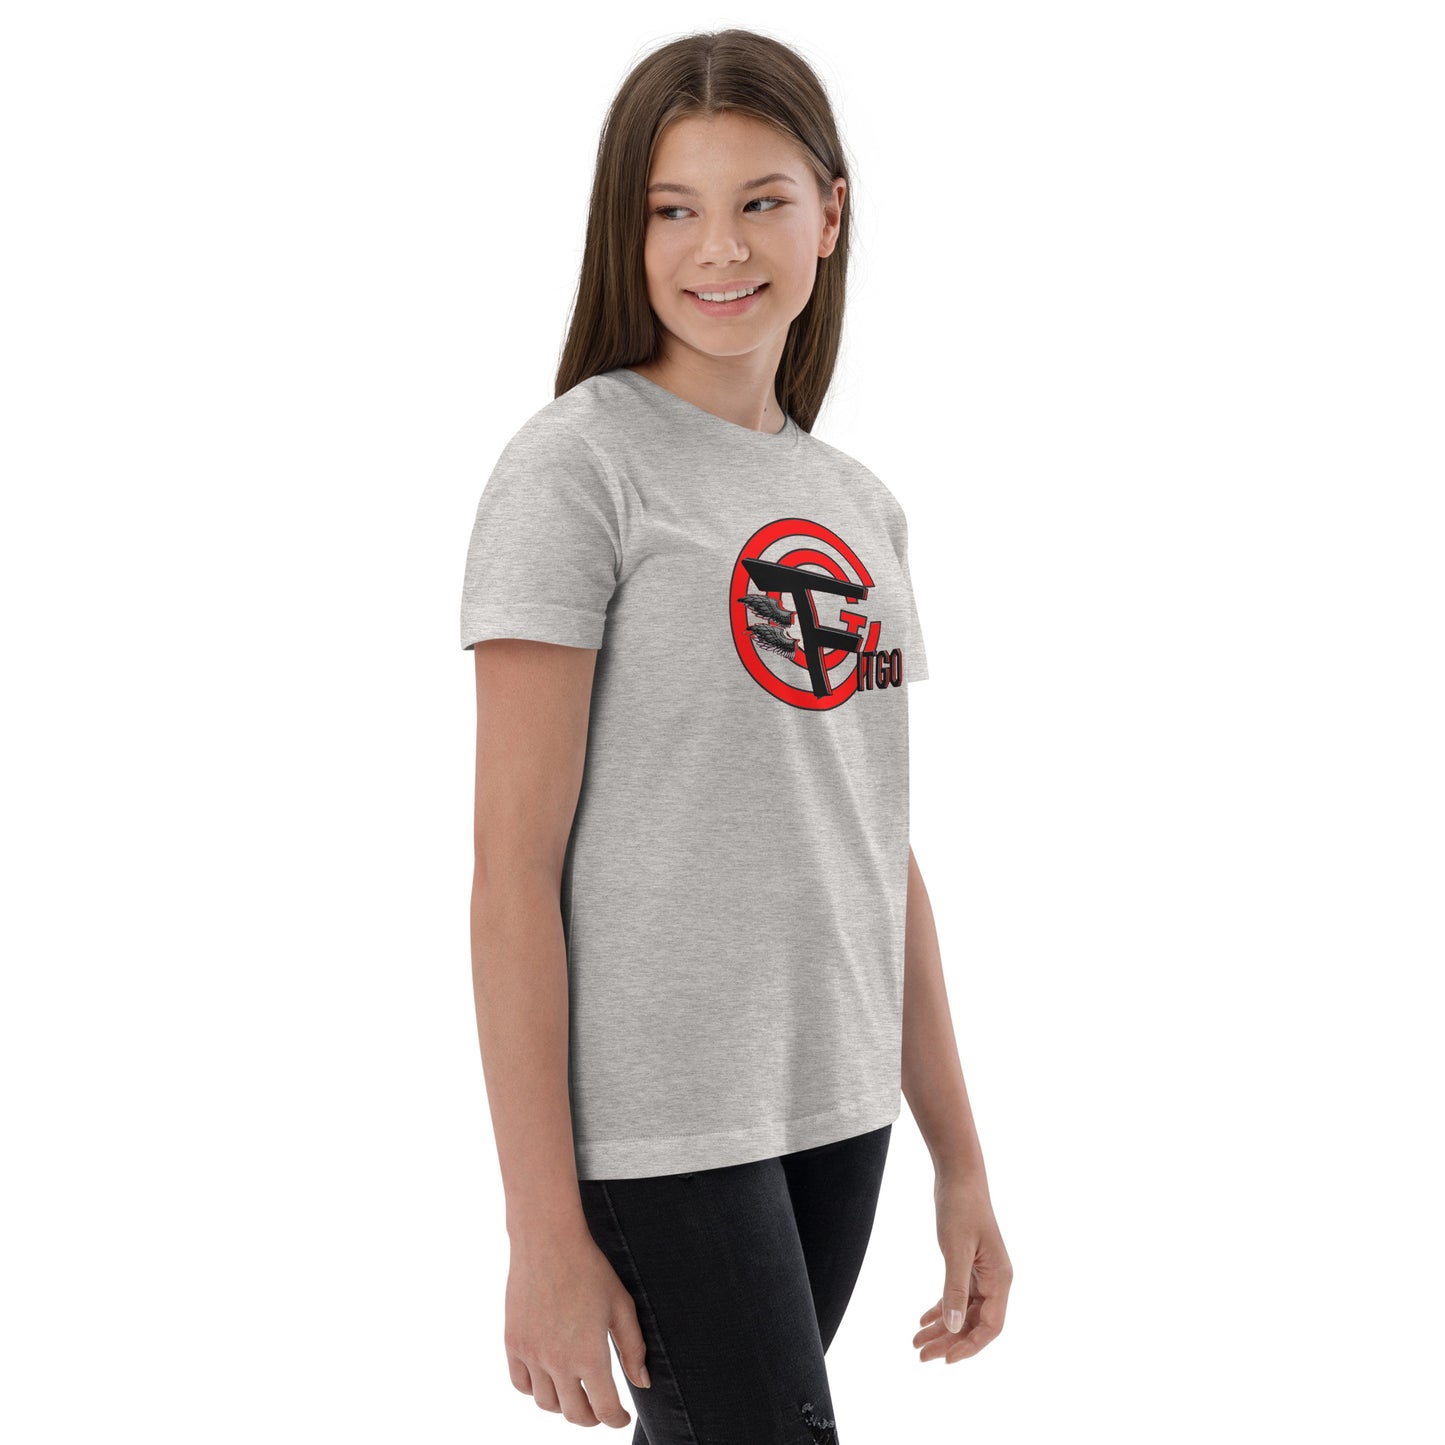 Girl's Fitgo On Target T-Shirt